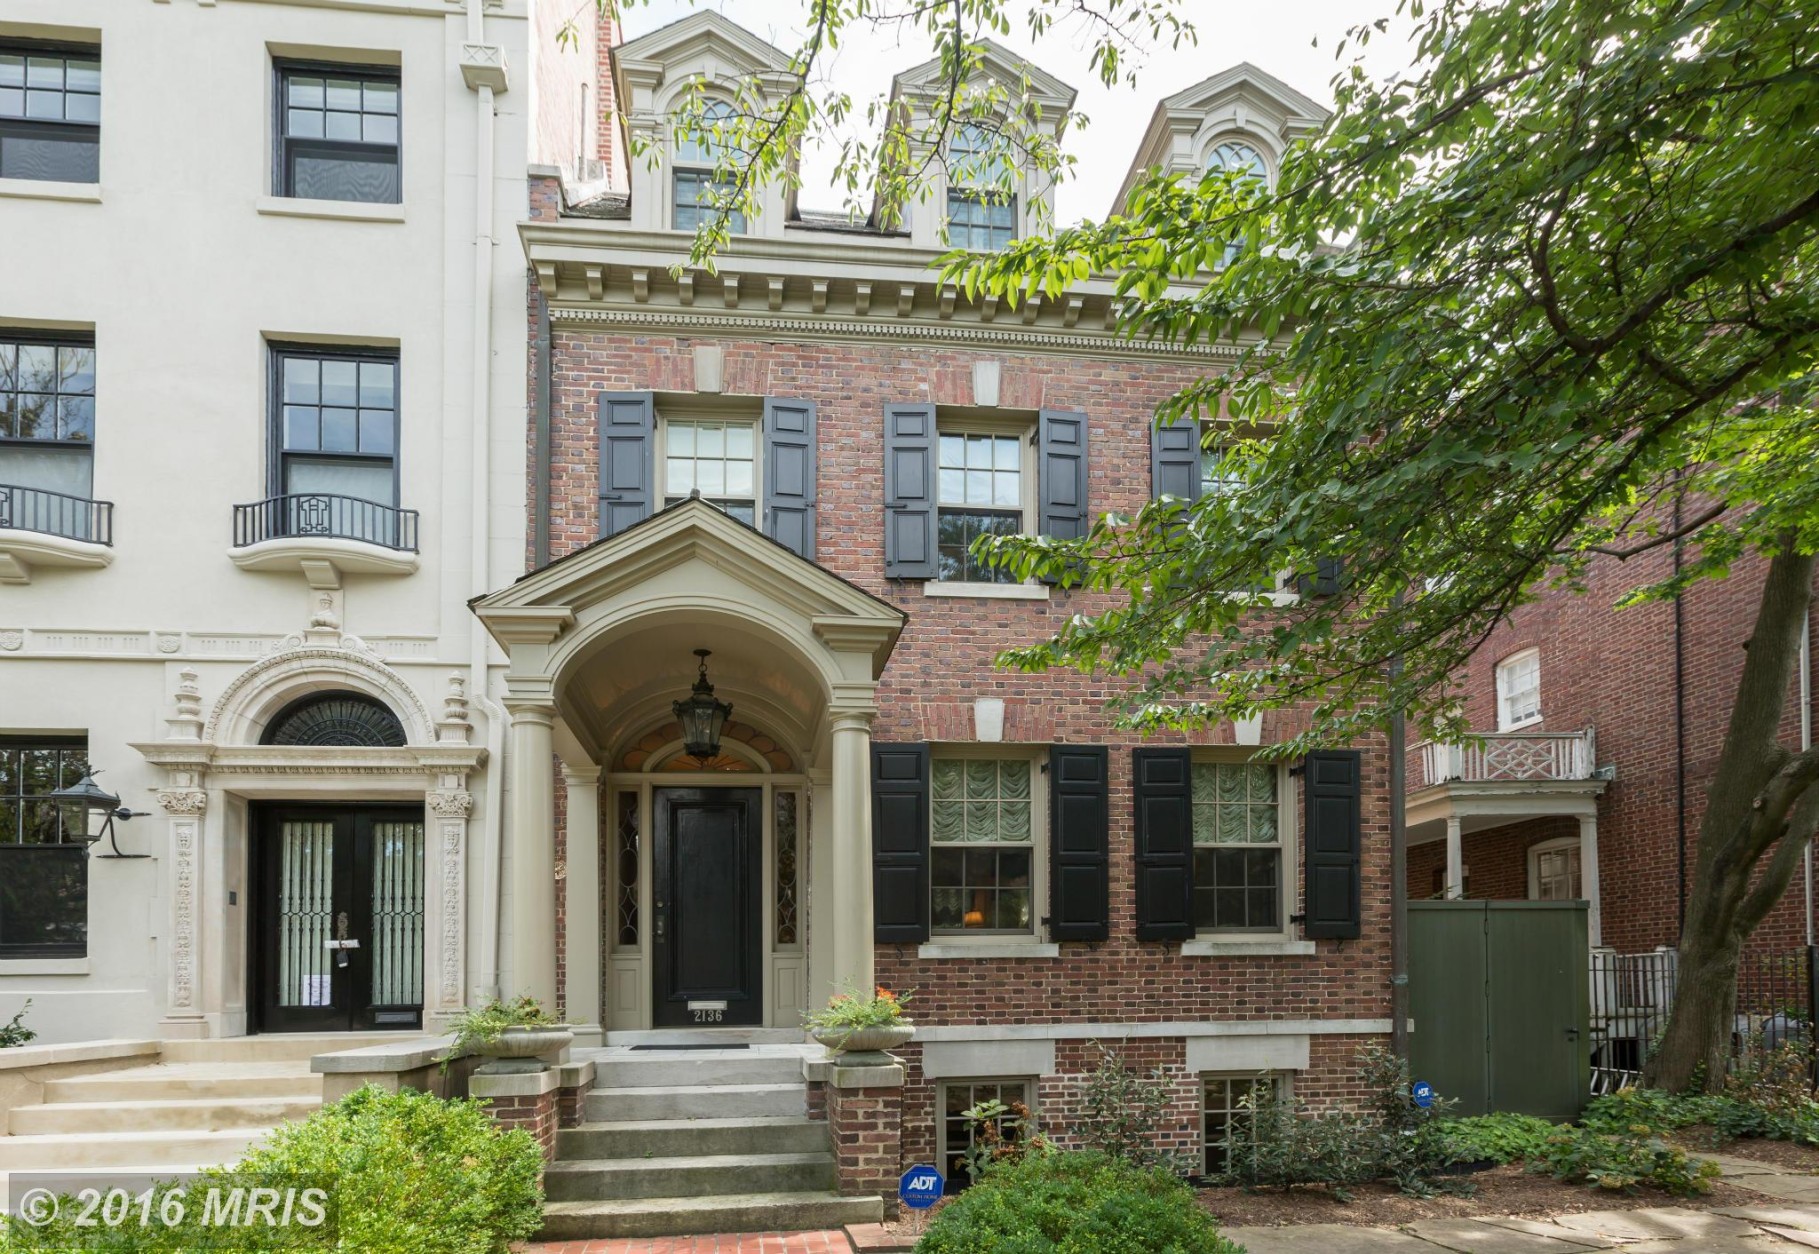 14. $2,750,000
2136 Wyoming Ave. NW, Washington, D.C.
This 1912 Federal-style house has five bedrooms, four full bathrooms and two half-baths. (MRIS)